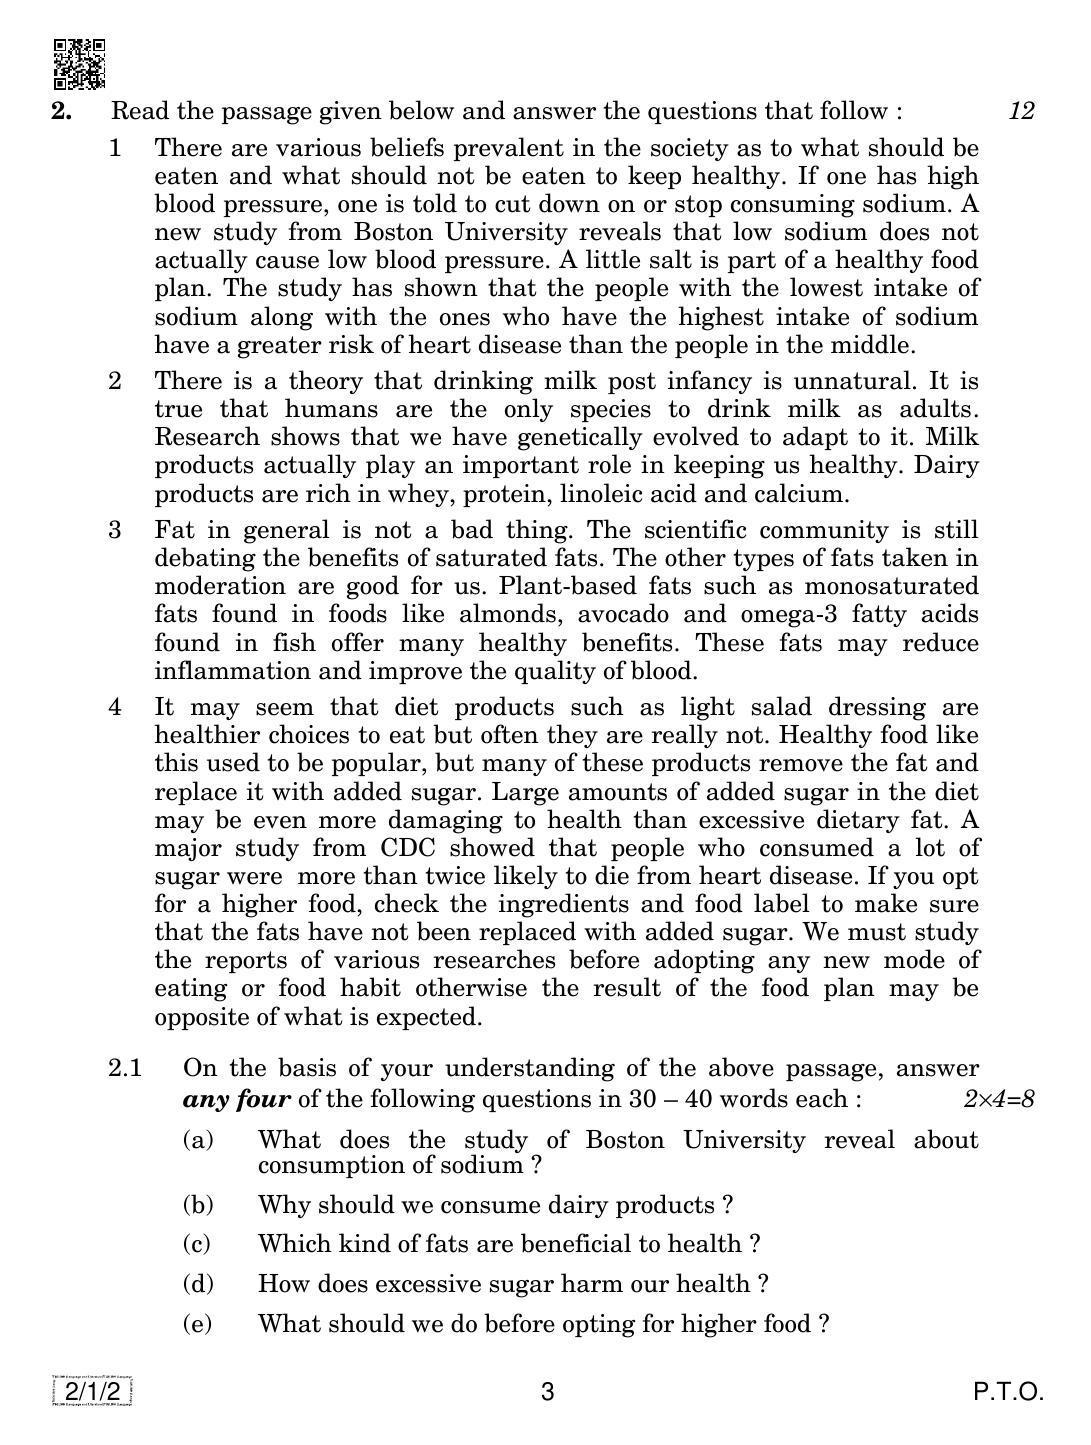 CBSE Class 10 2-1-2 ENGLISH LANG. & LIT. 2019 Compartment Question Paper - Page 3